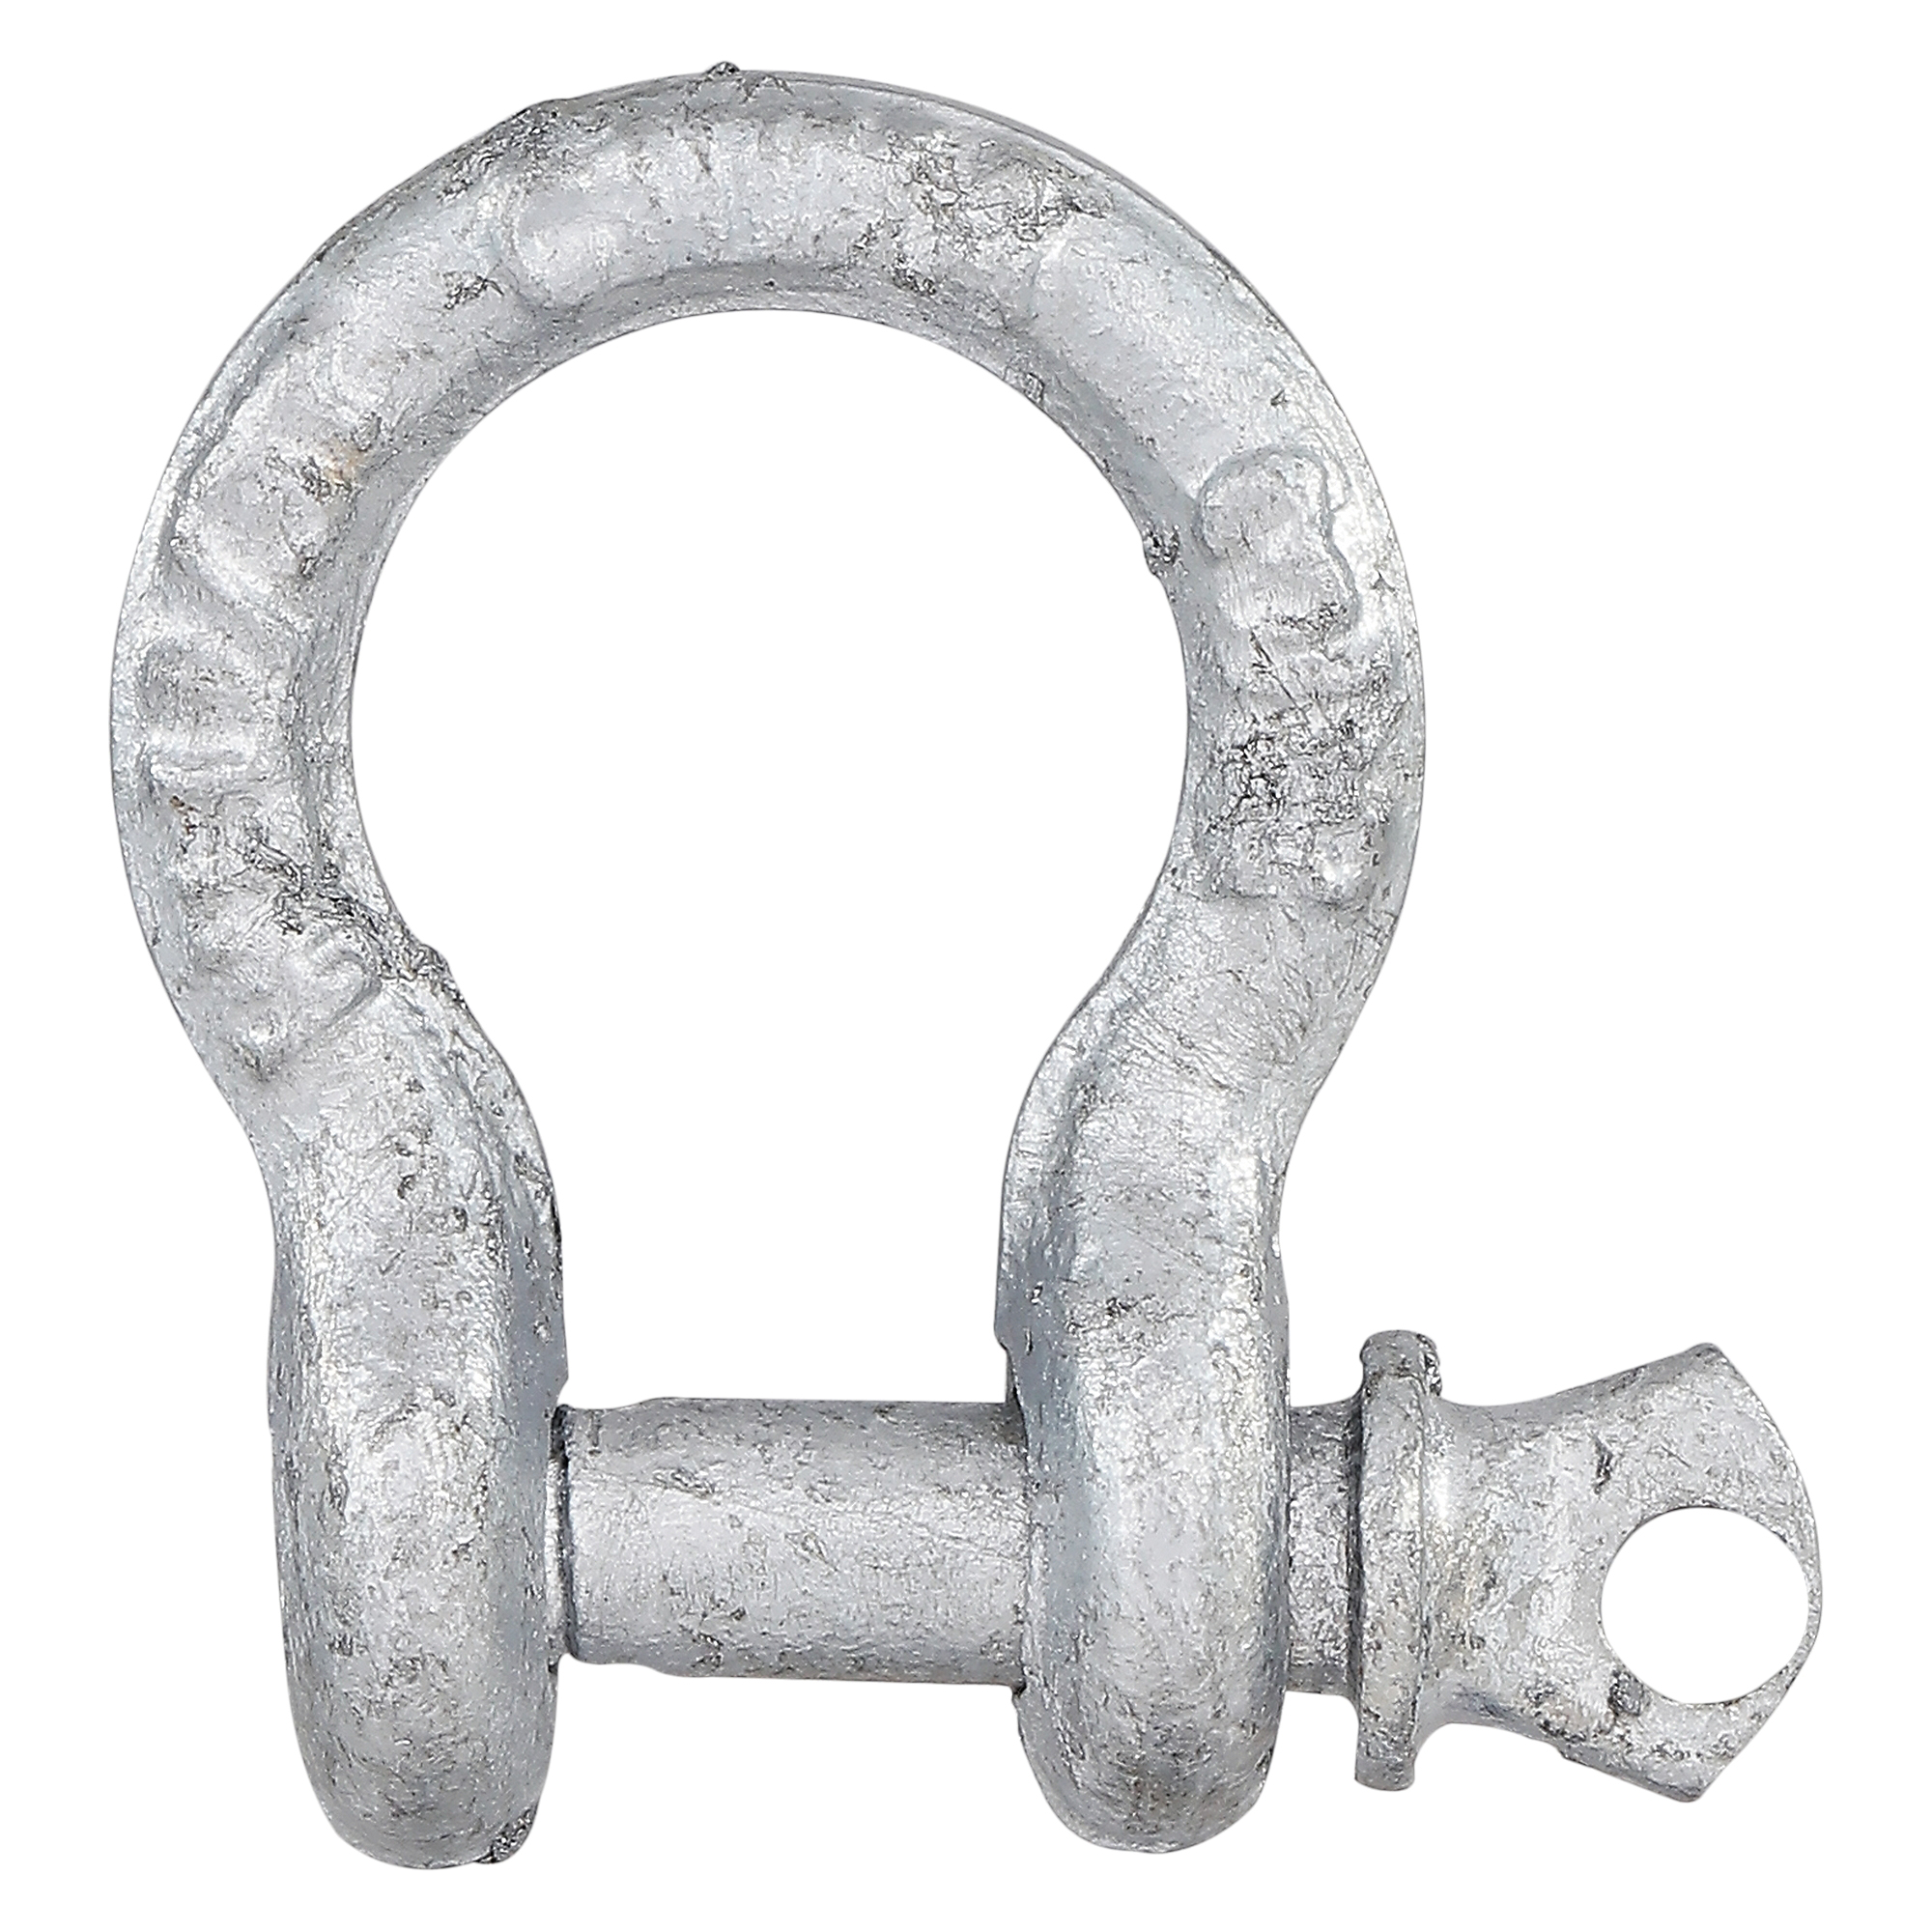 N100-346 Anchor Shackle, 3/16 in Trade, 650 lb Working Load, 7/32 in Dia Wire, Steel, Galvanized